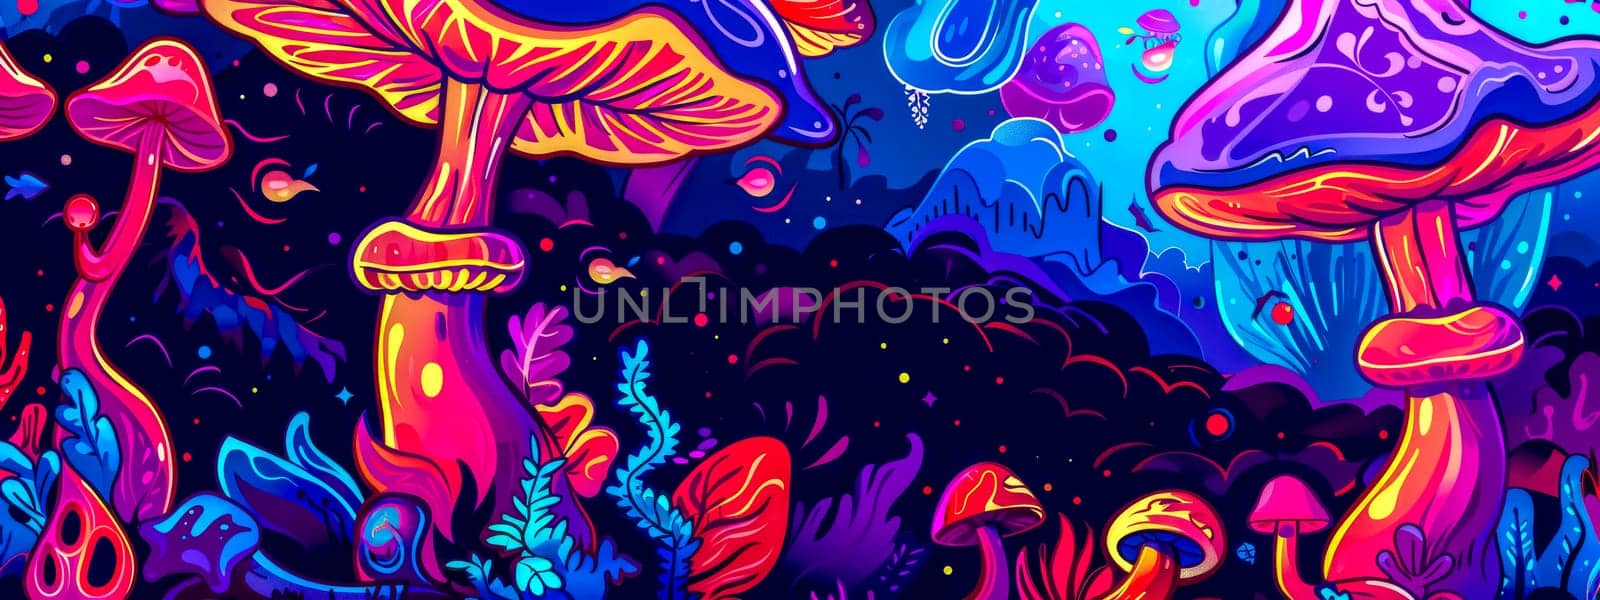 Vibrant digital art of a magical forest with glowing mushrooms and mystical plants